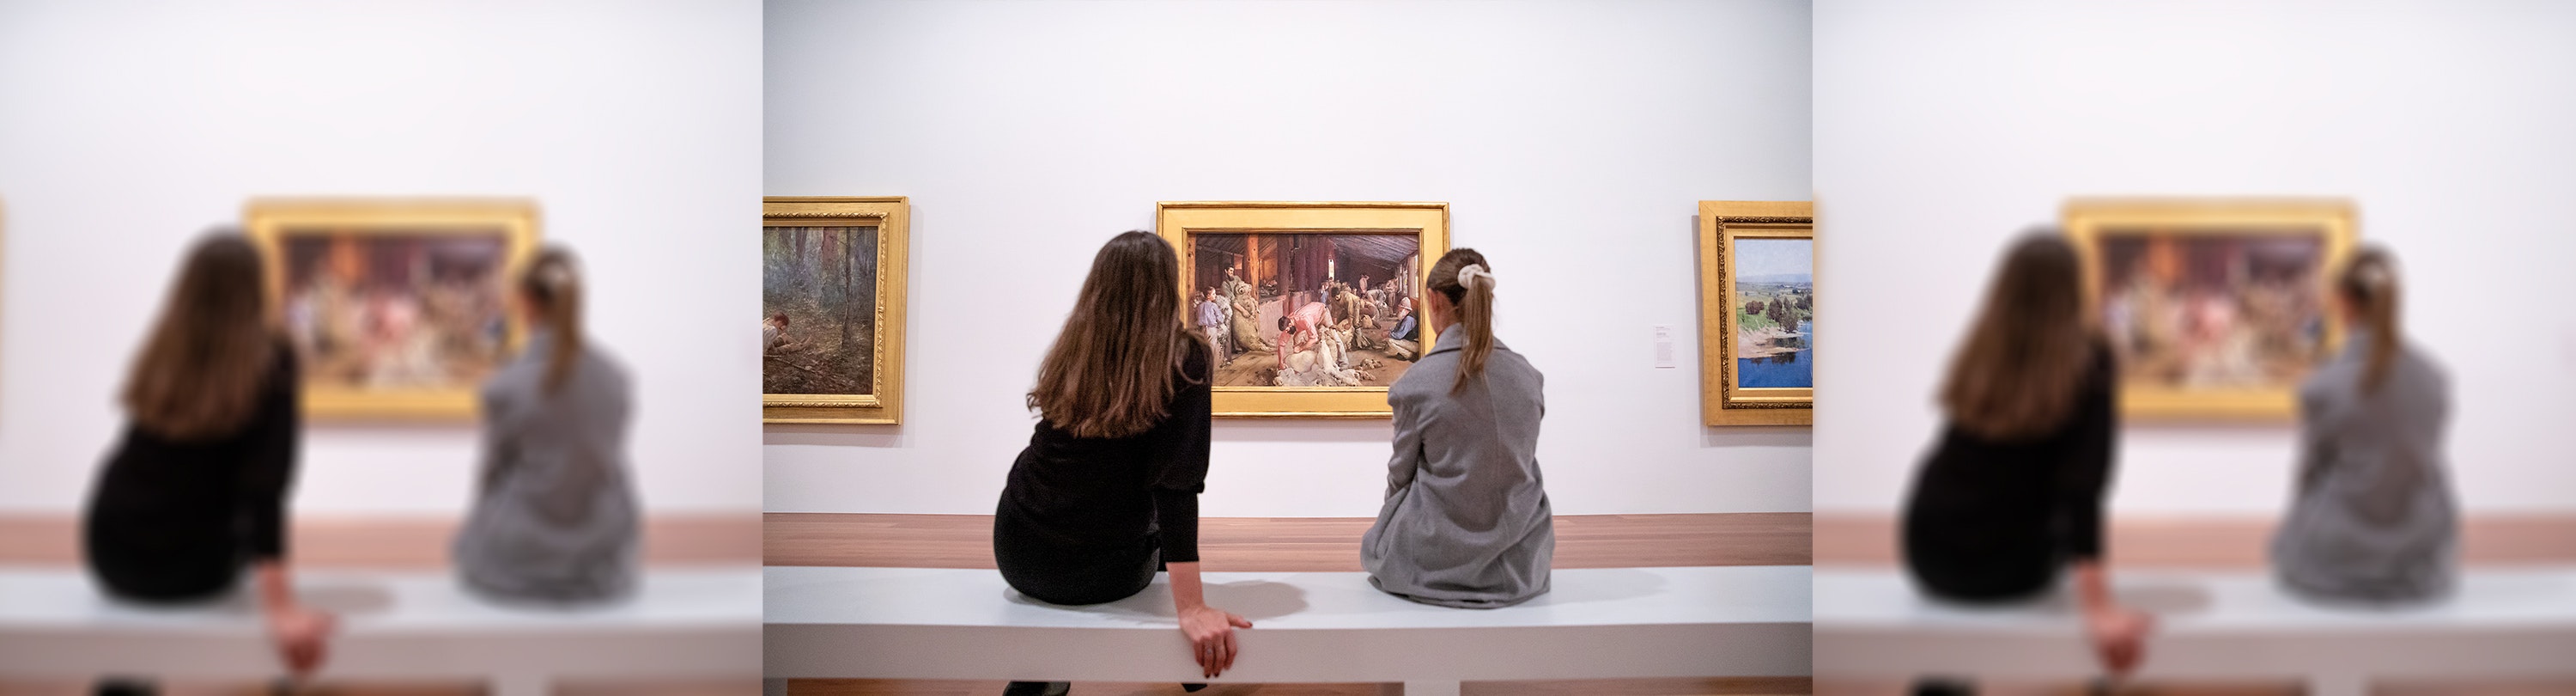 Two women sitting on a white bench in The Ian Potter Centre: NGV Australia looking at a painting of a man shearing